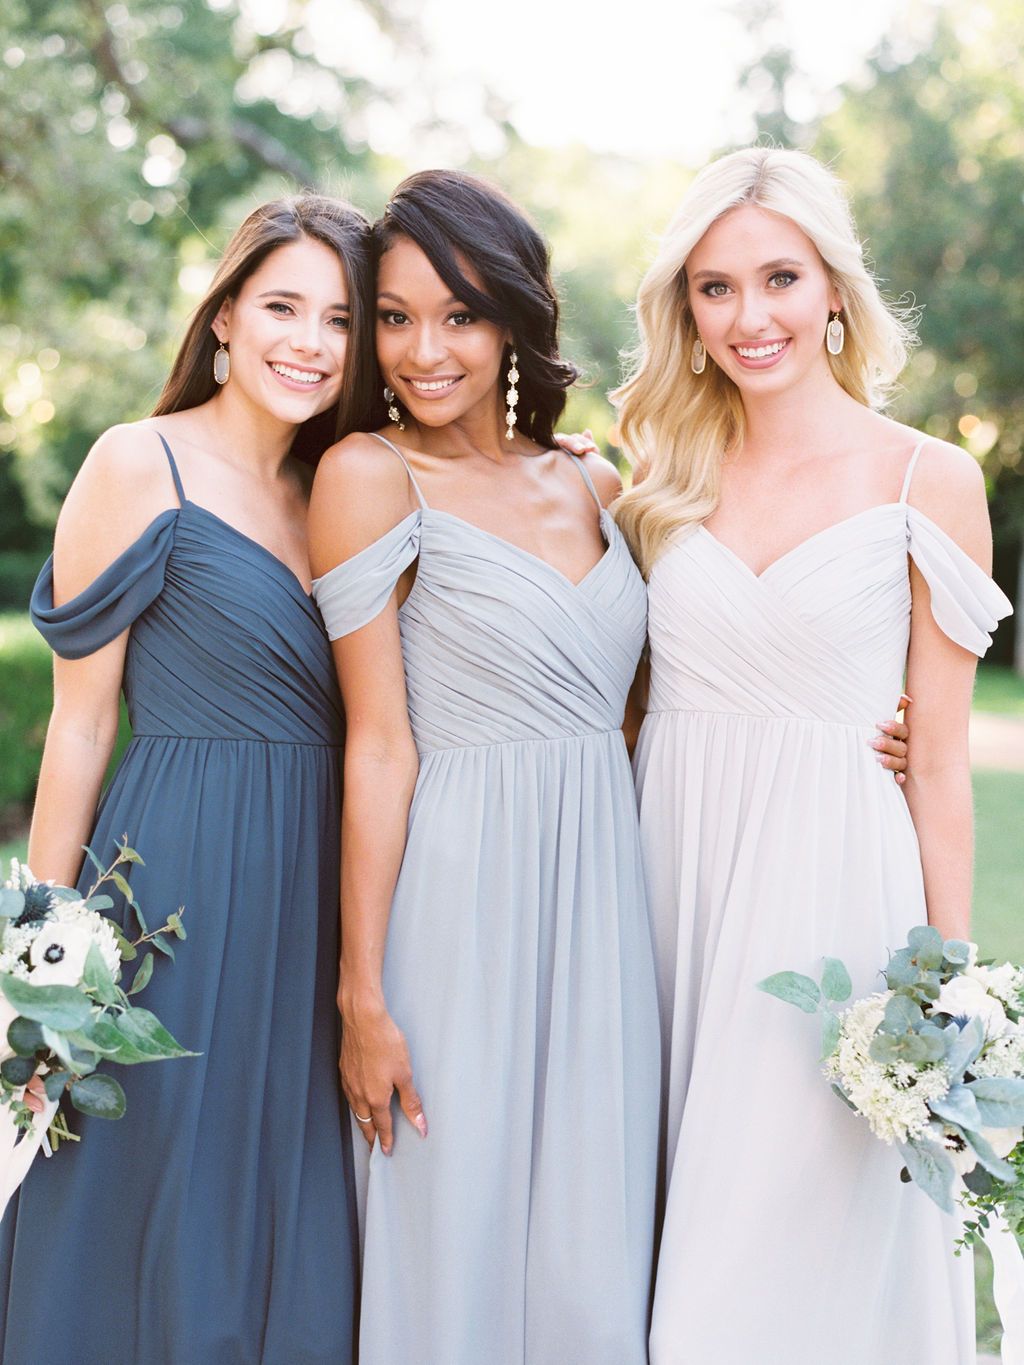 Mix and Match Revelry Bridesmaid Dresses and Separates ...